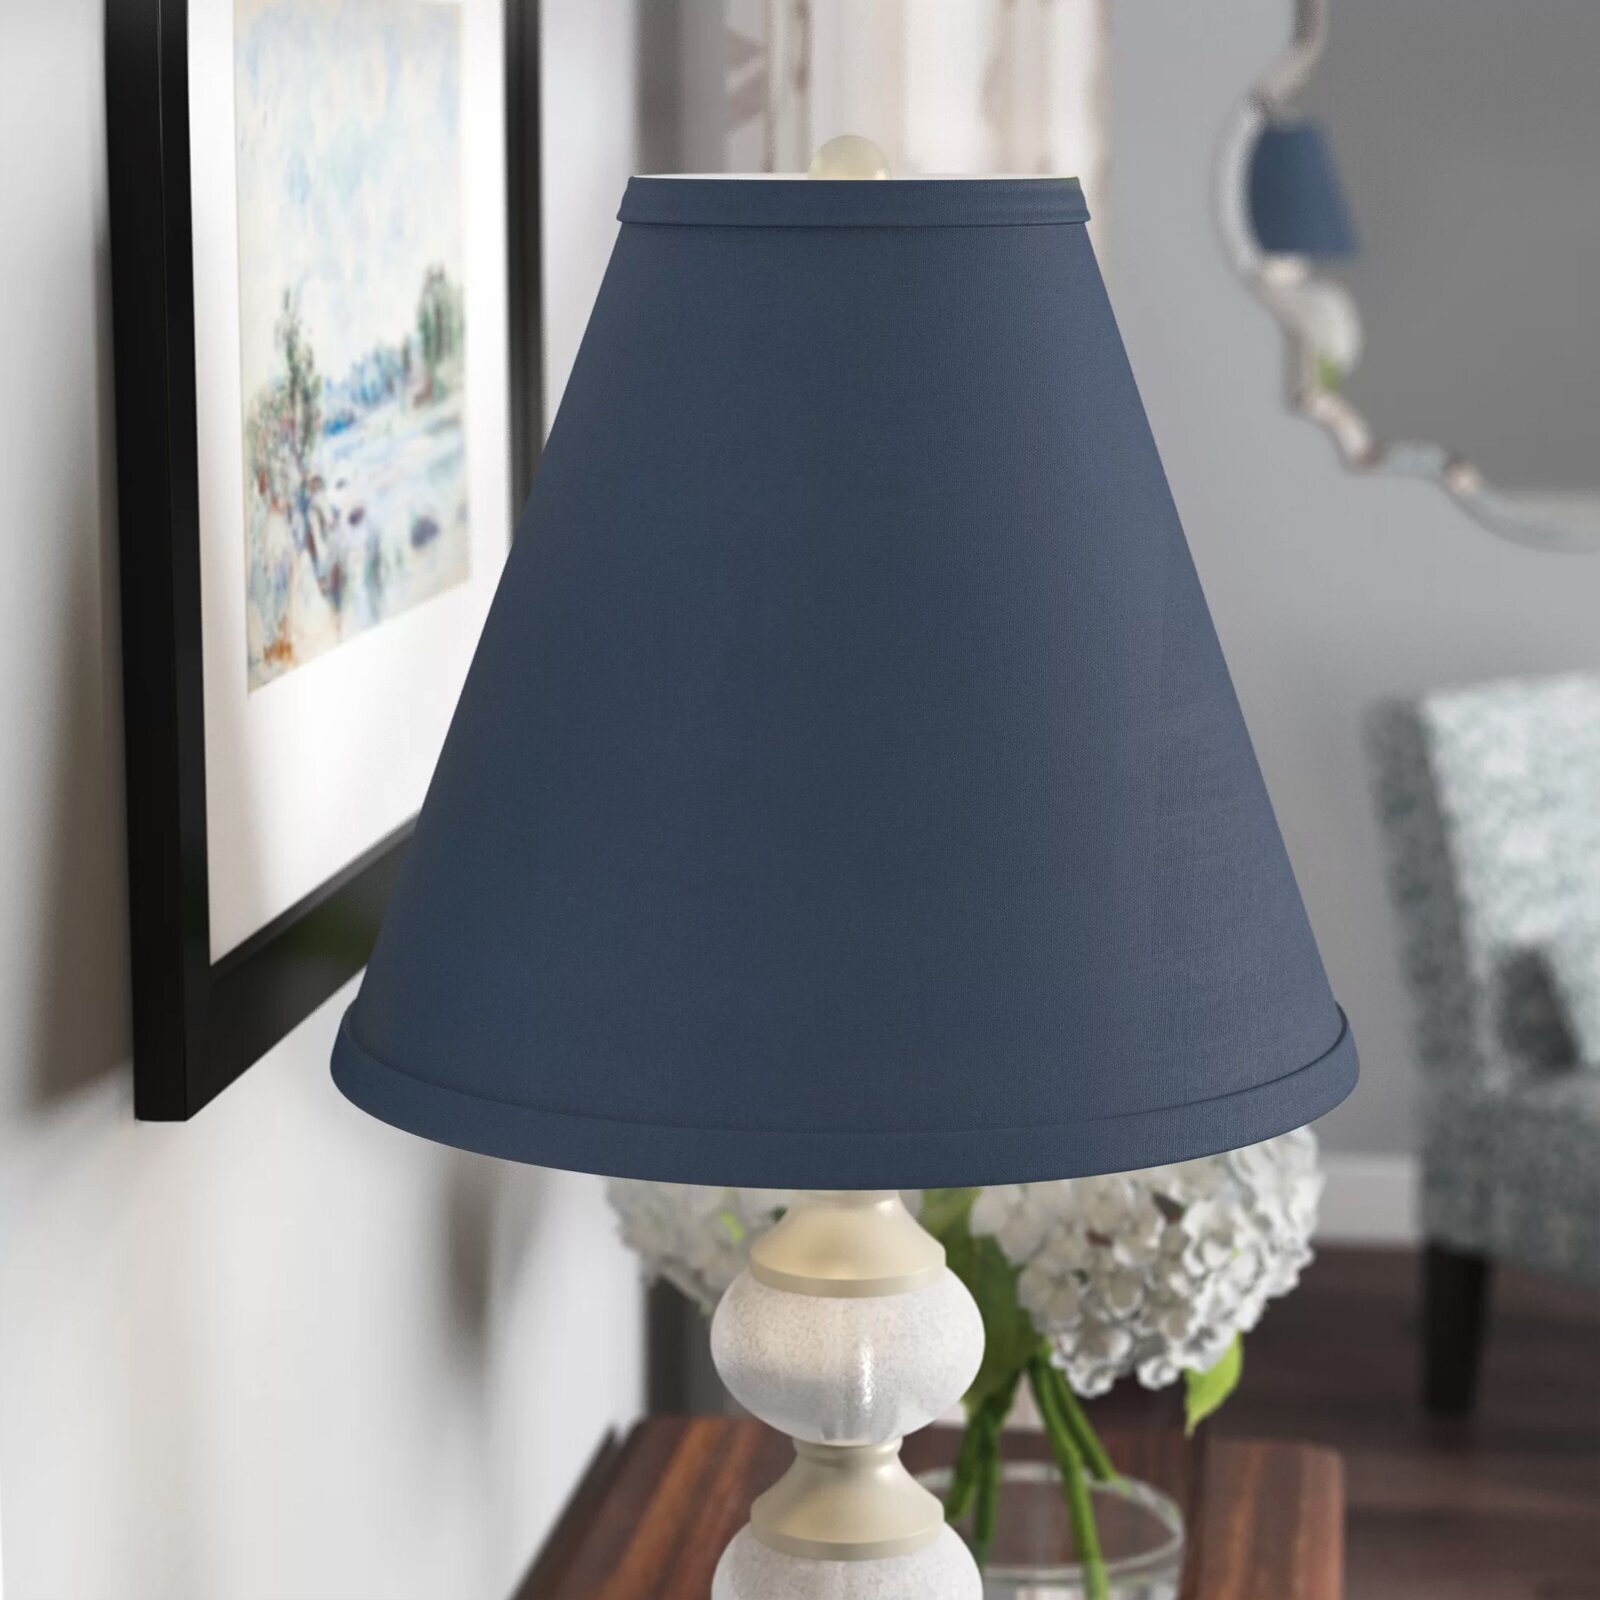 Horn Style MCM Lampshade